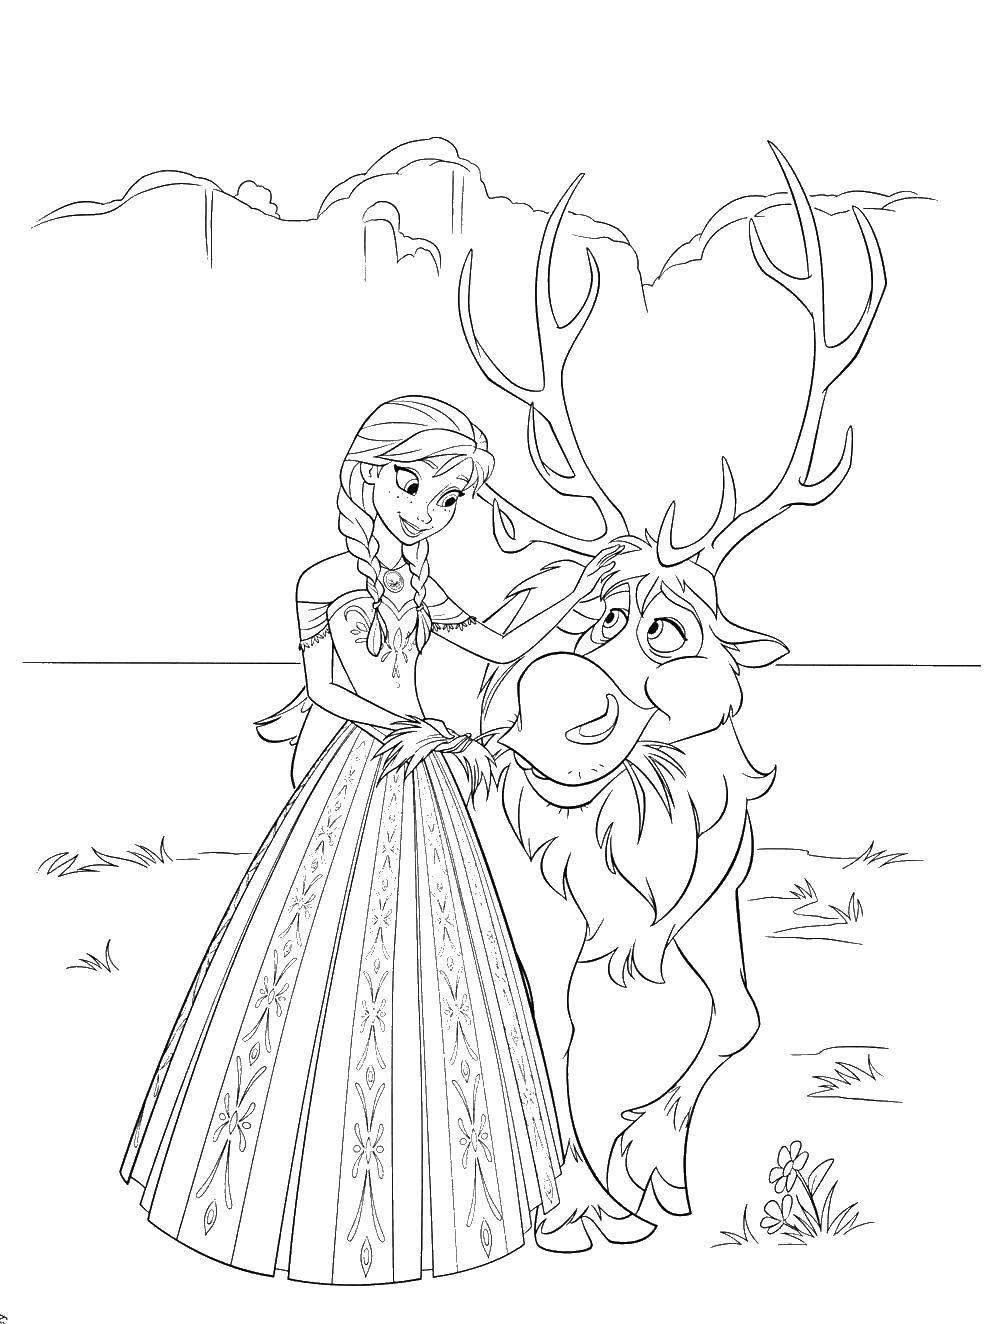 Coloring Anna and the reindeer Sven. Category coloring cold heart. Tags:  Kristoff, Elsa, Anna.